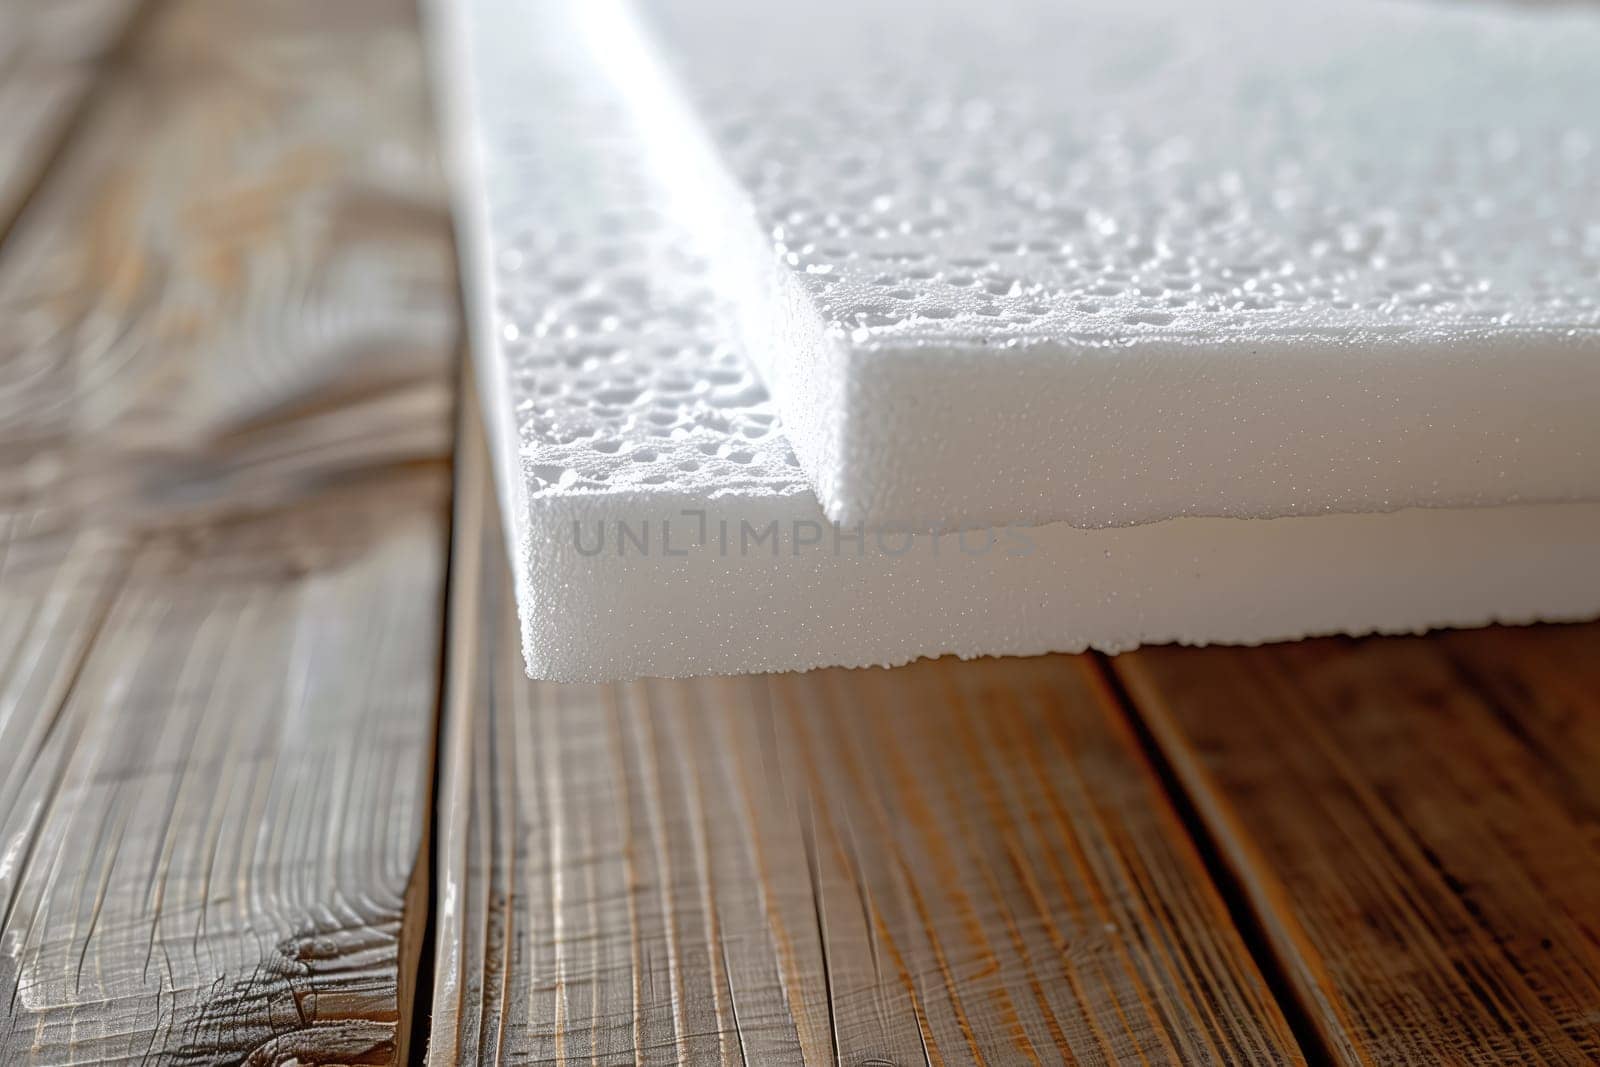 Styrofoam Board Detail: Versatile Material for Packing and Insulation Projects. Expanded polystyrene plates. A stack of building materials for house insulation. by Dvorak